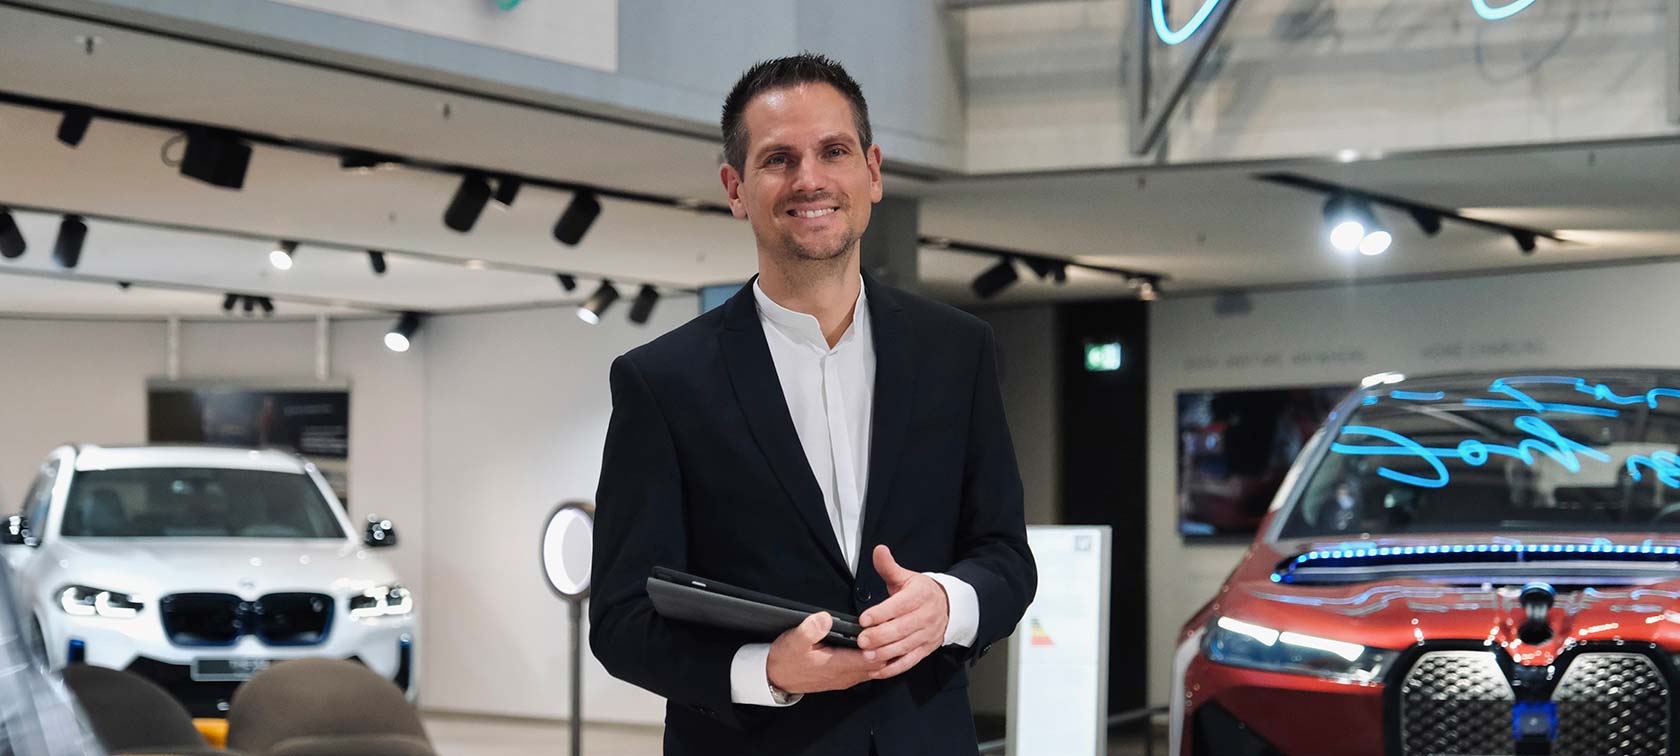 Smiling man in suit holds tablet for vehicle consultation at BMW Welt.